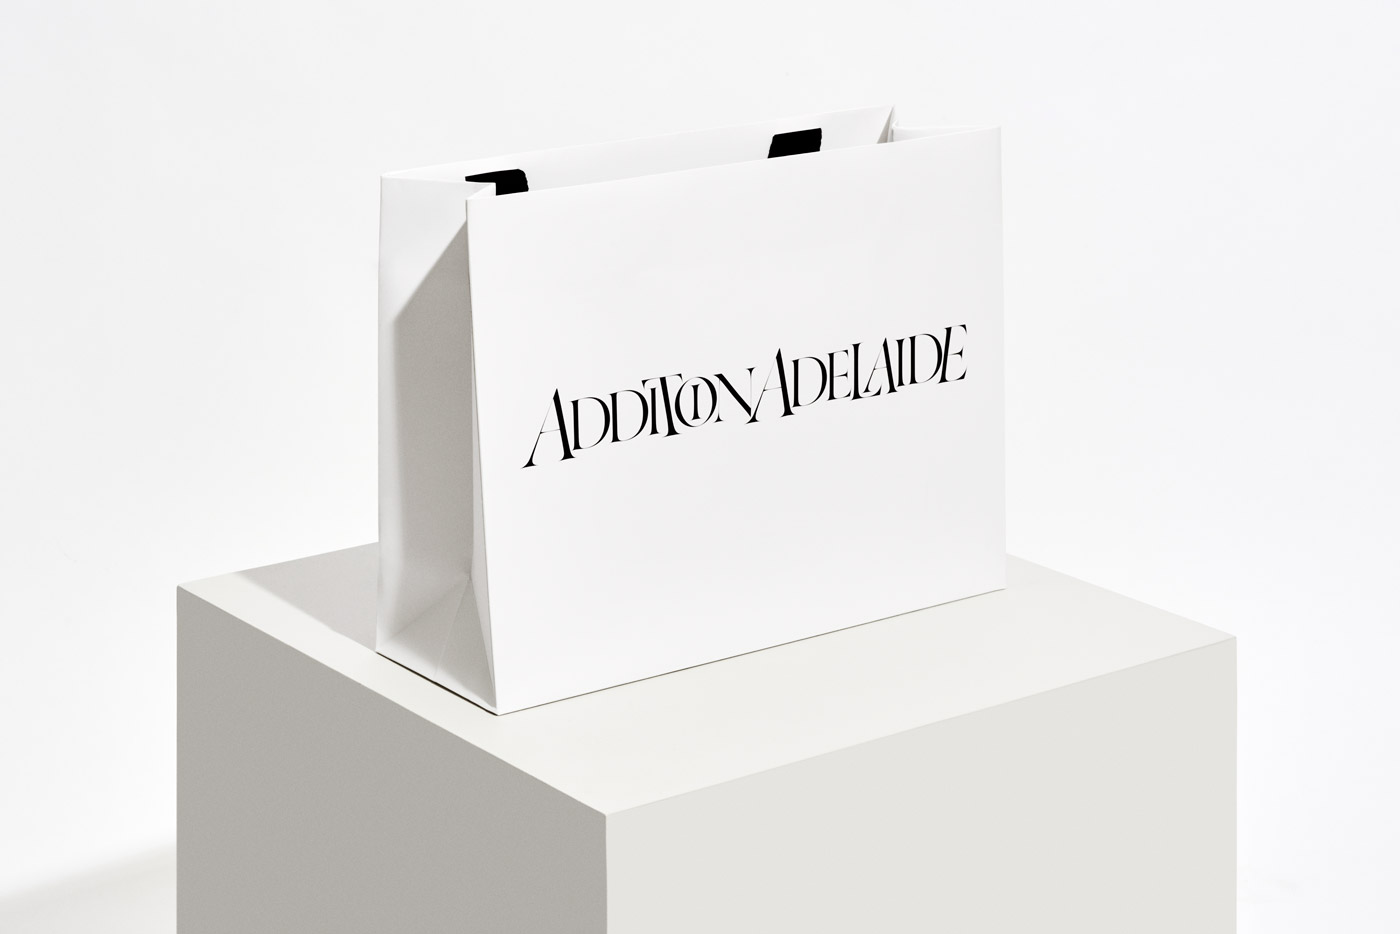 Addition Adelaide Tokyo – Shopping bags